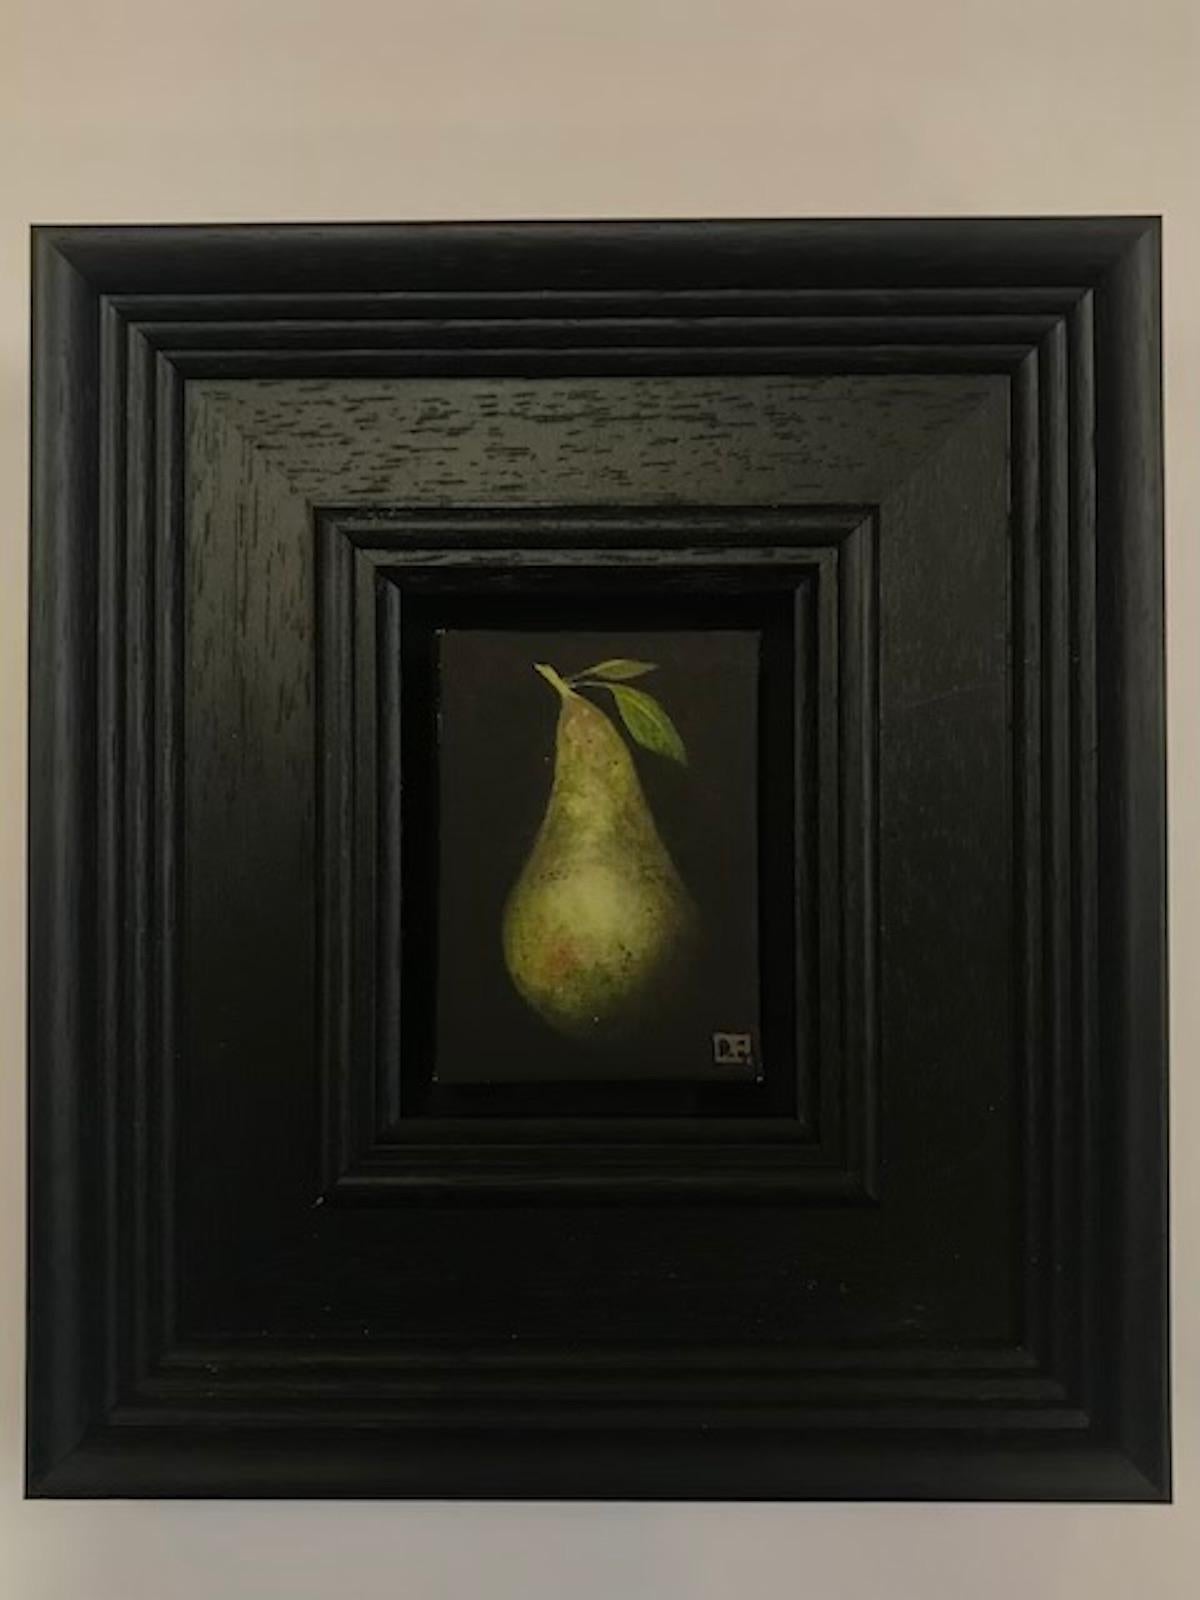 Pocket Conference Pear - Photorealist Painting by Dani Humberstone